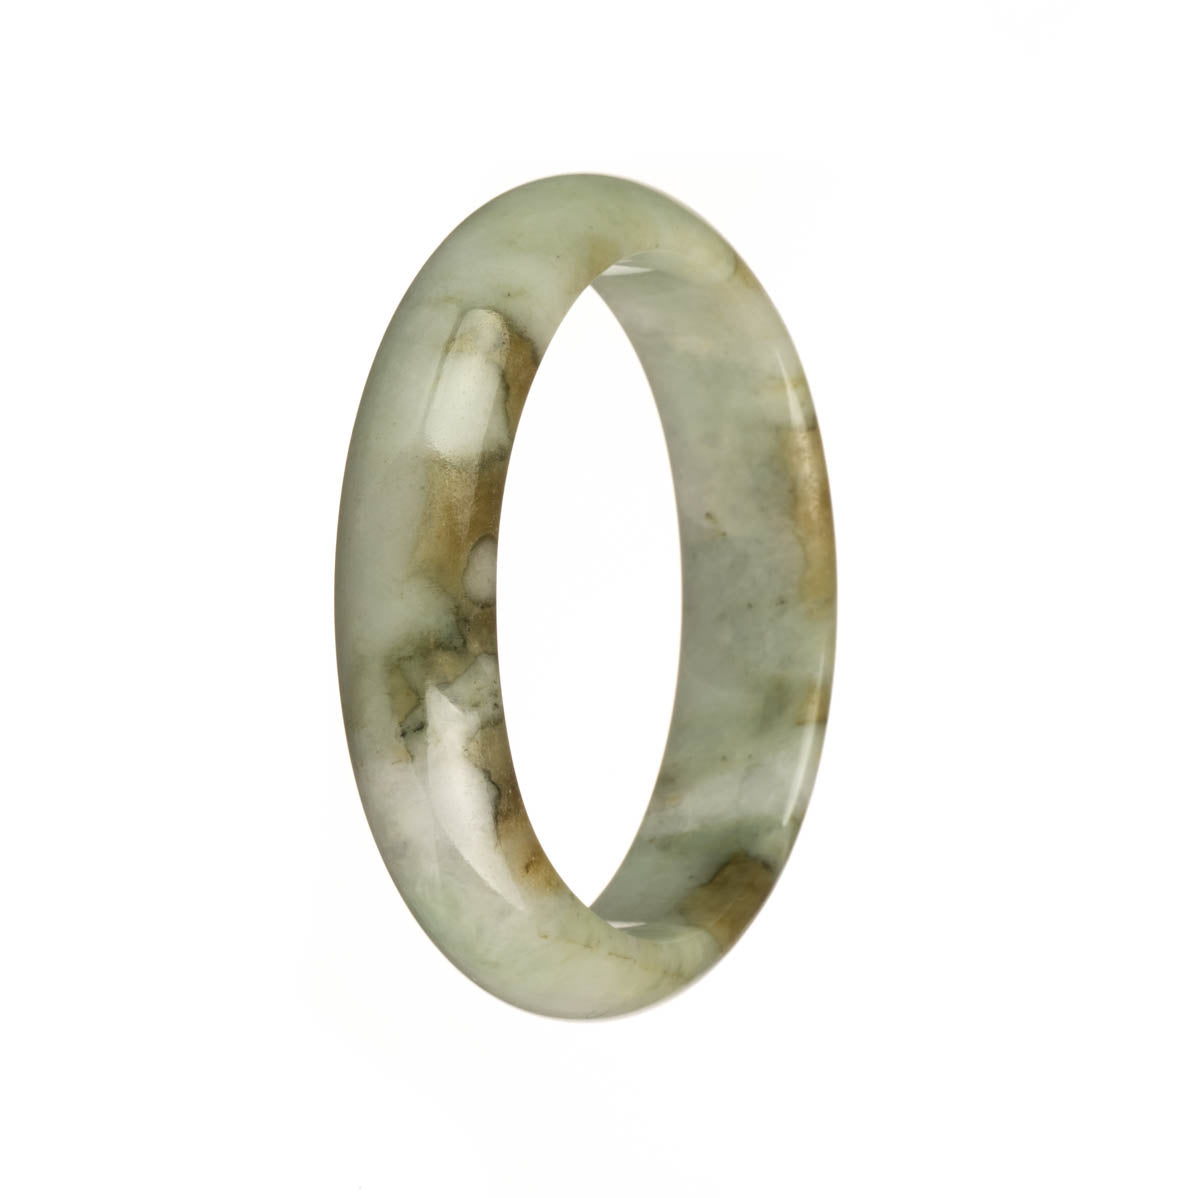 A pale green jade bangle with a brown pattern, featuring a half moon shape. It is made of genuine Type A jadeite jade and measures 54mm in size. Sold by MAYS.